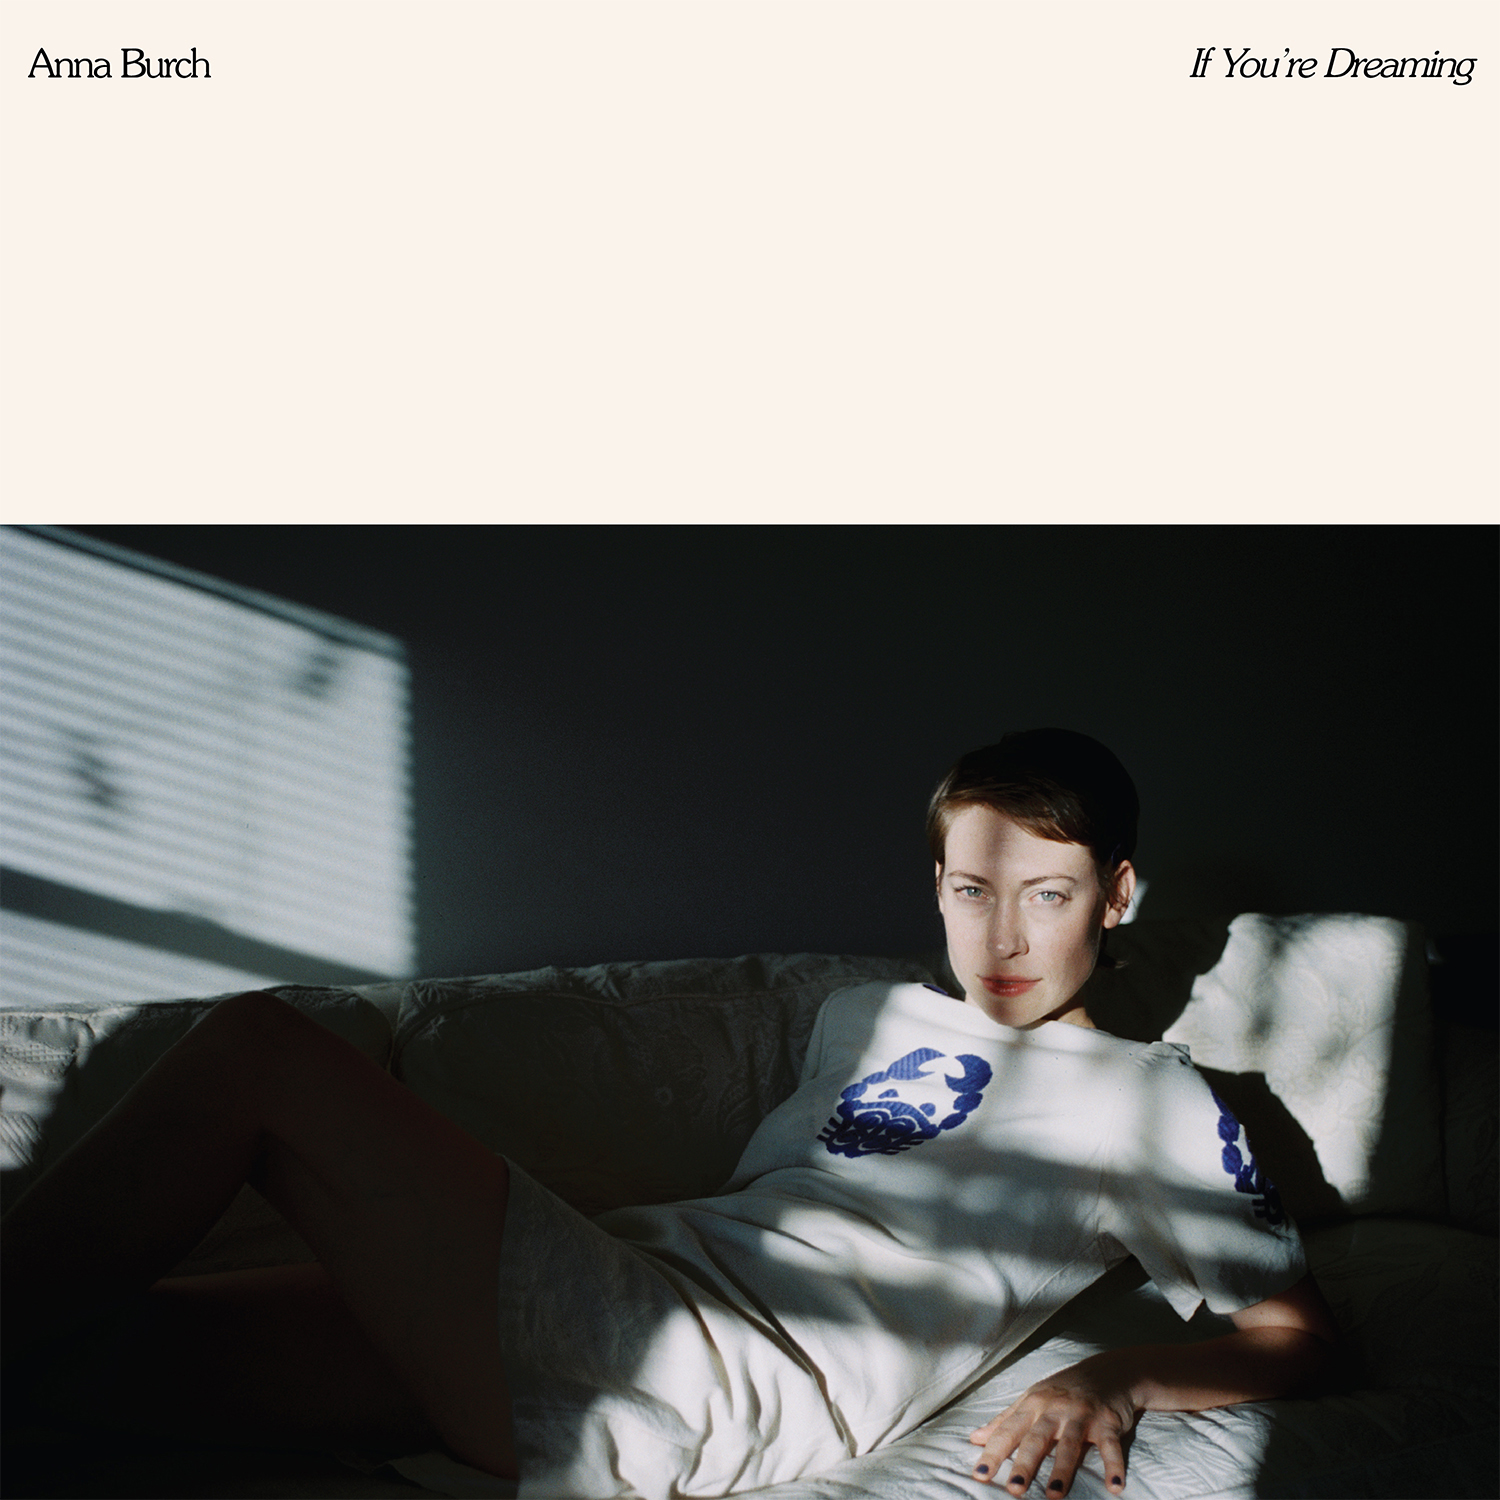 ALBUM REVIEW: Anna Burch - If You’re Dreaming 